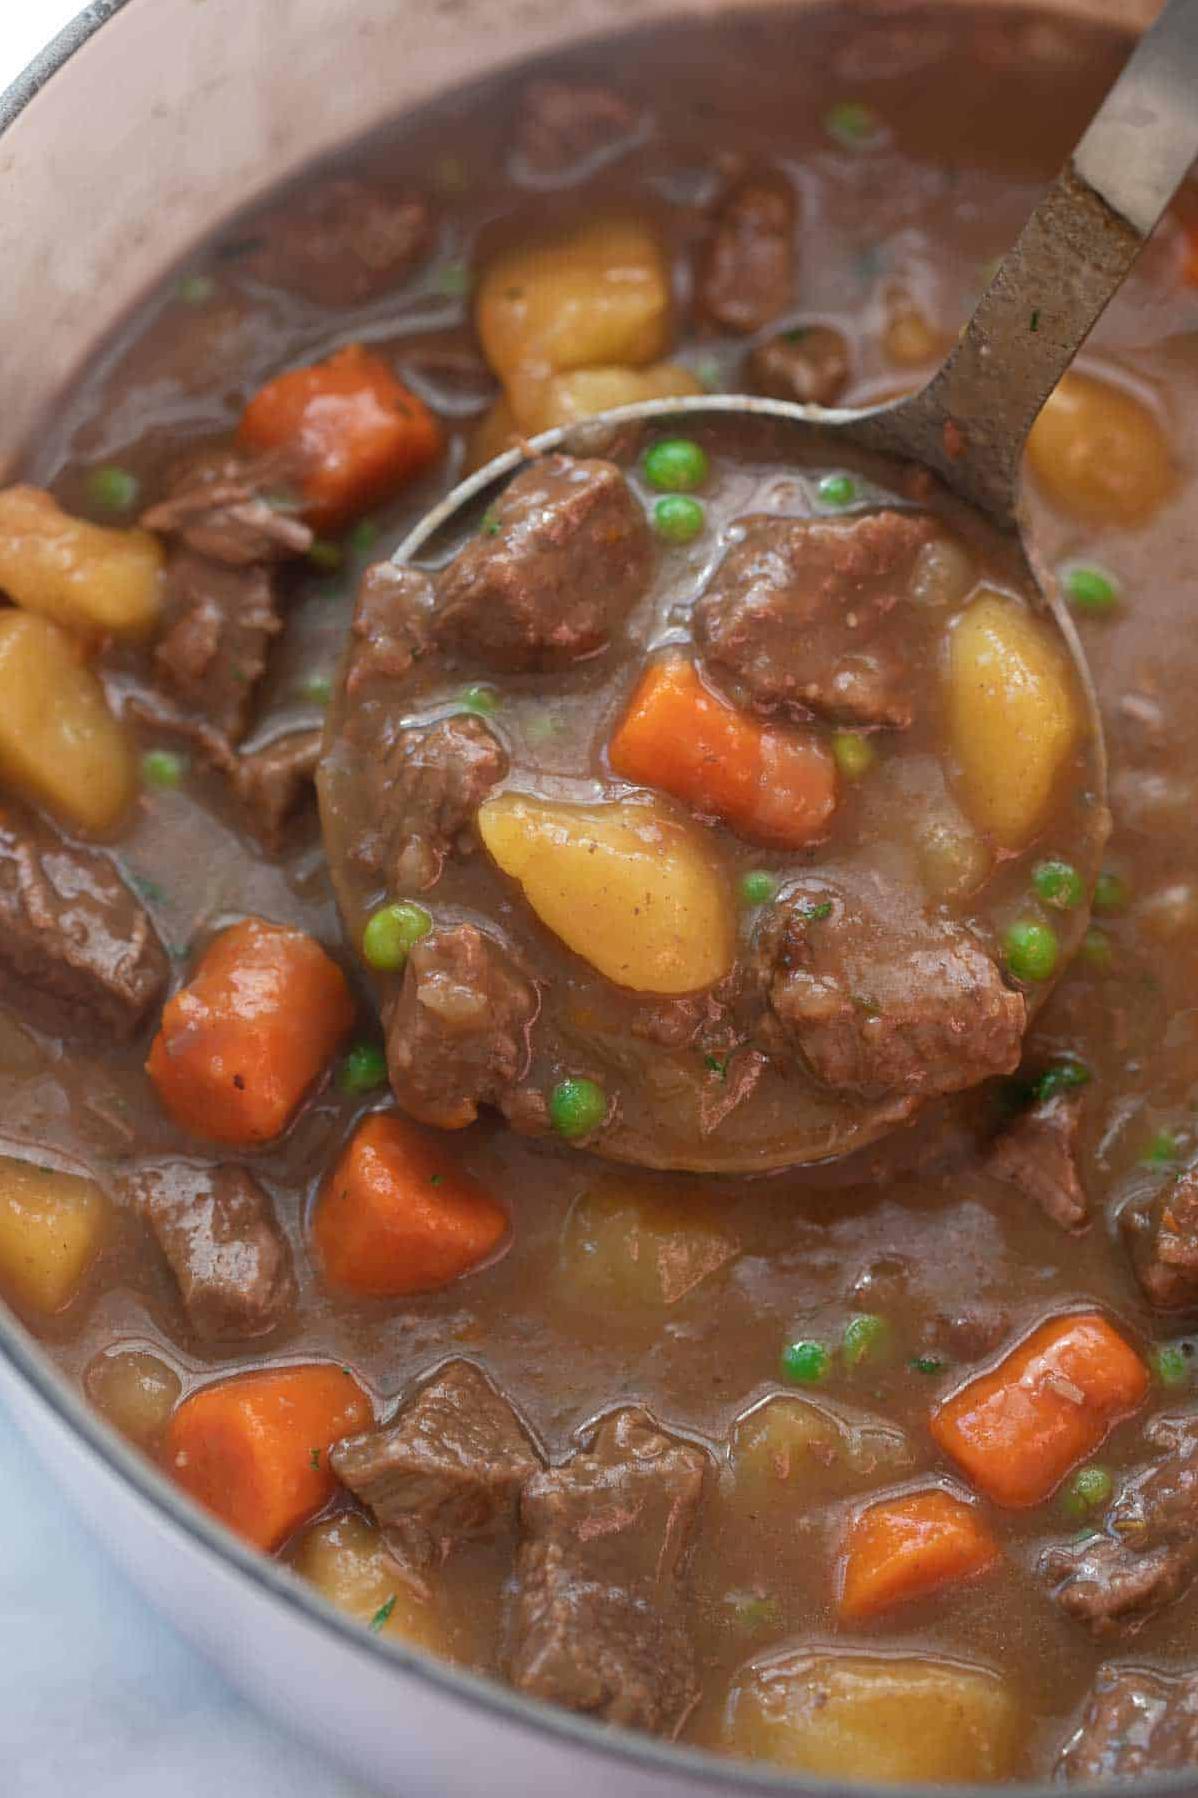  Hearty beef stew with a burst of tomato flavor.